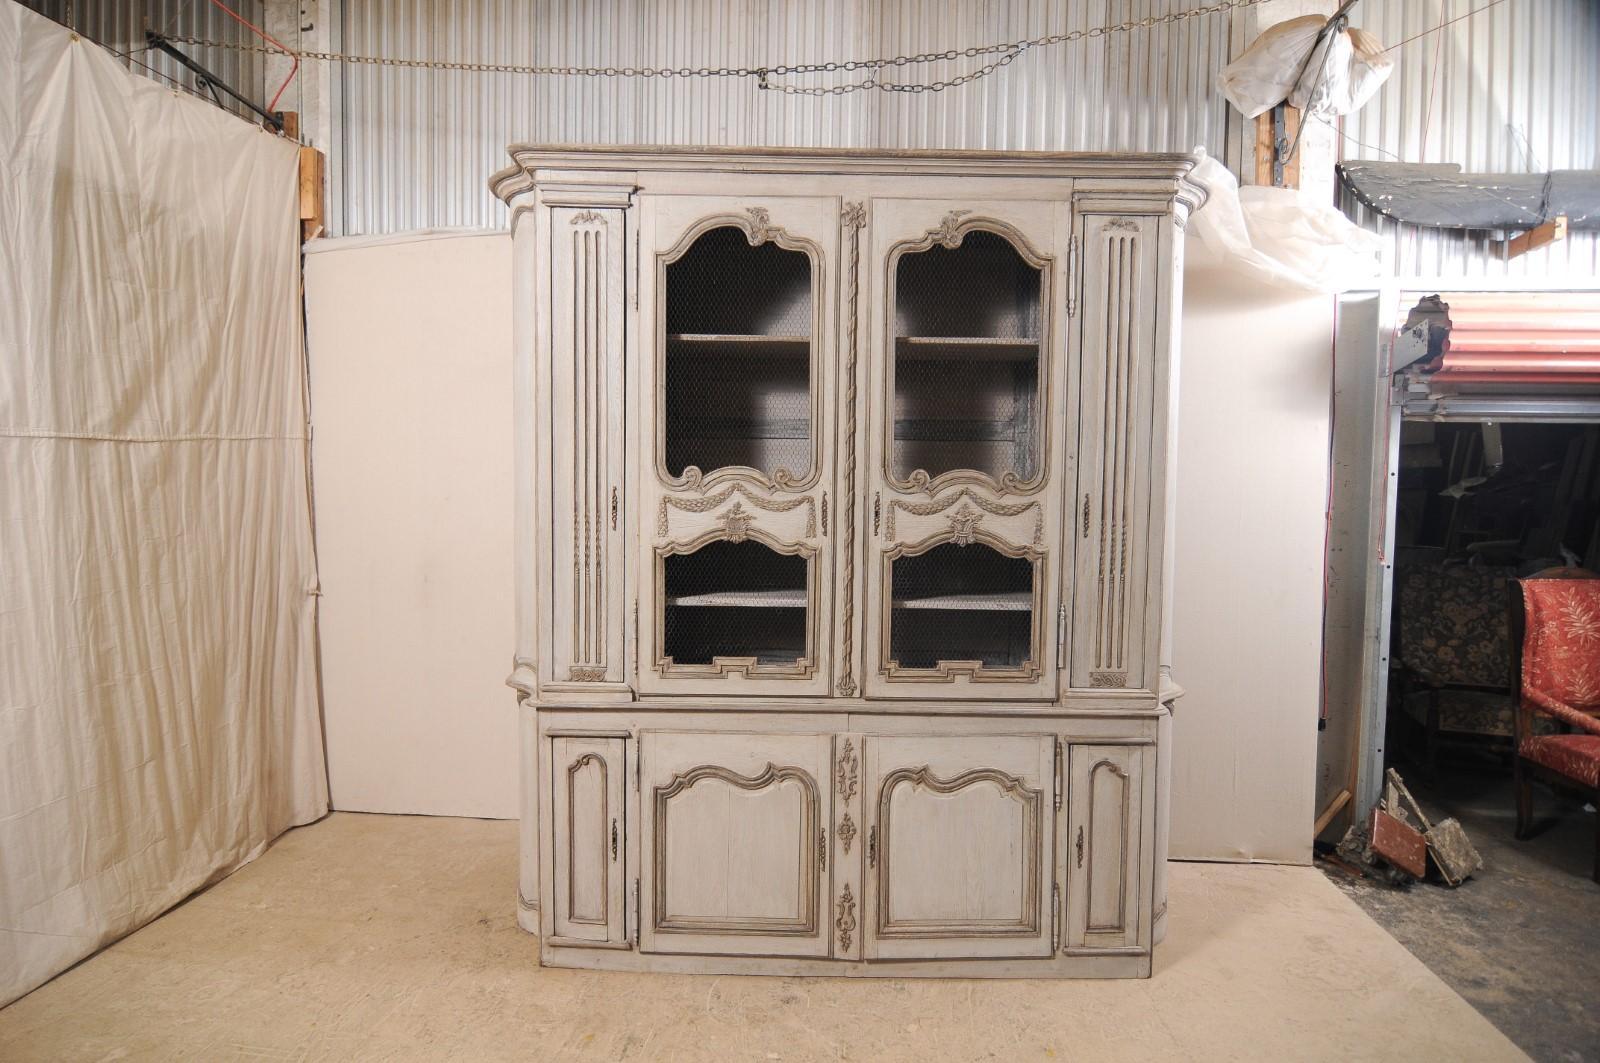 A large French carved and painted wood display and storage cabinet from the mid-20th century. This vintage French buffet à deux-corps (which is the name for a French buffet consisting of an upper and lower case, 